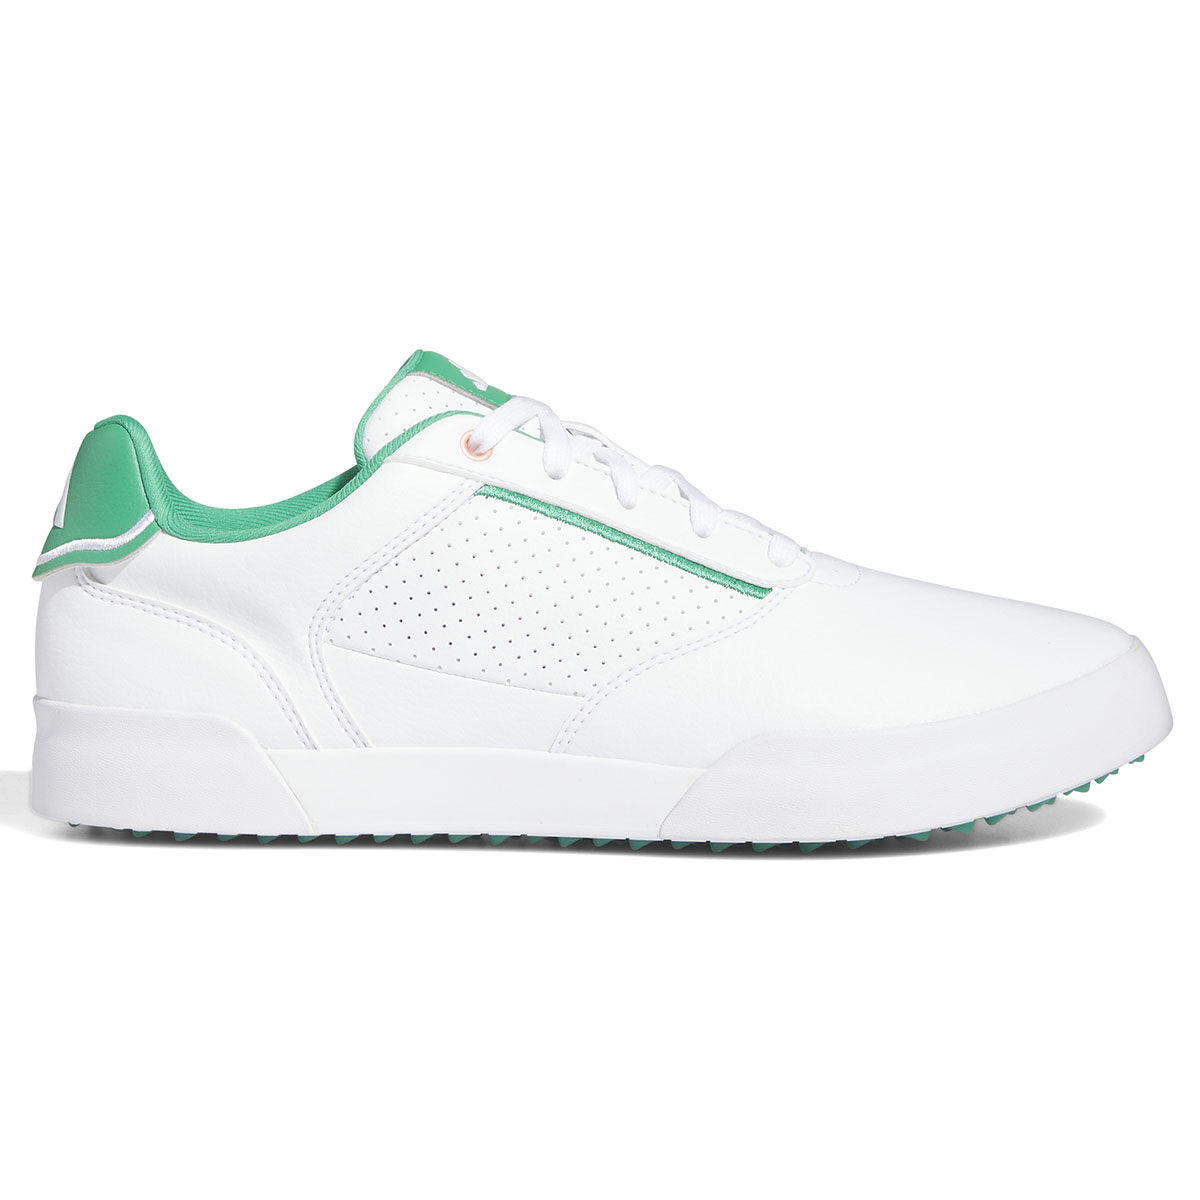 adidas Men's Retrocross Waterproof Spikeless Golf Shoes, Mens, White/court green/coral fusion, 7 | American Golf - Father's Day Gift von adidas Golf